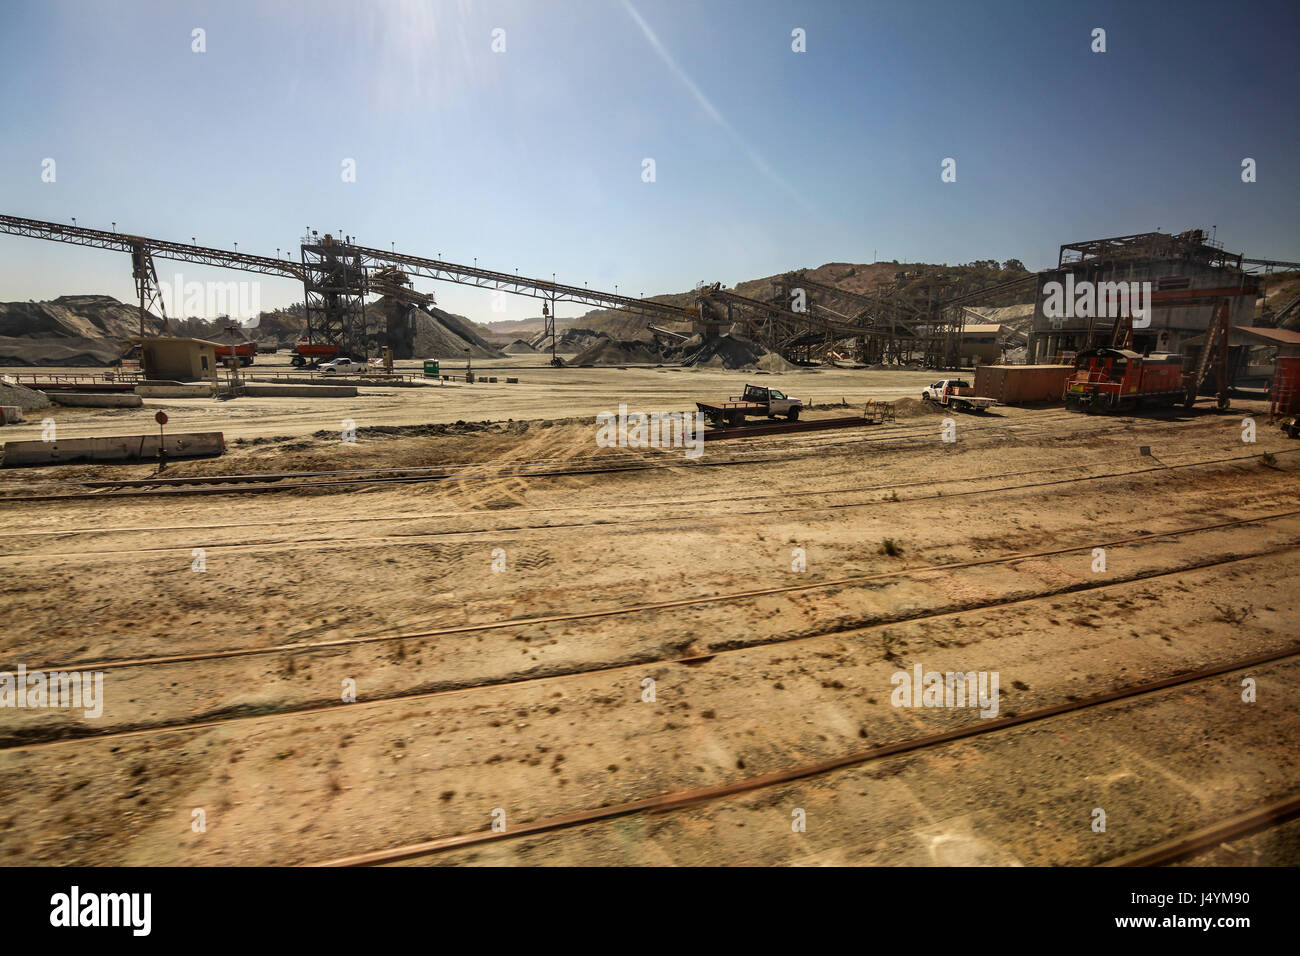 A construction site with a lot of dirt and travelators Stock Photo